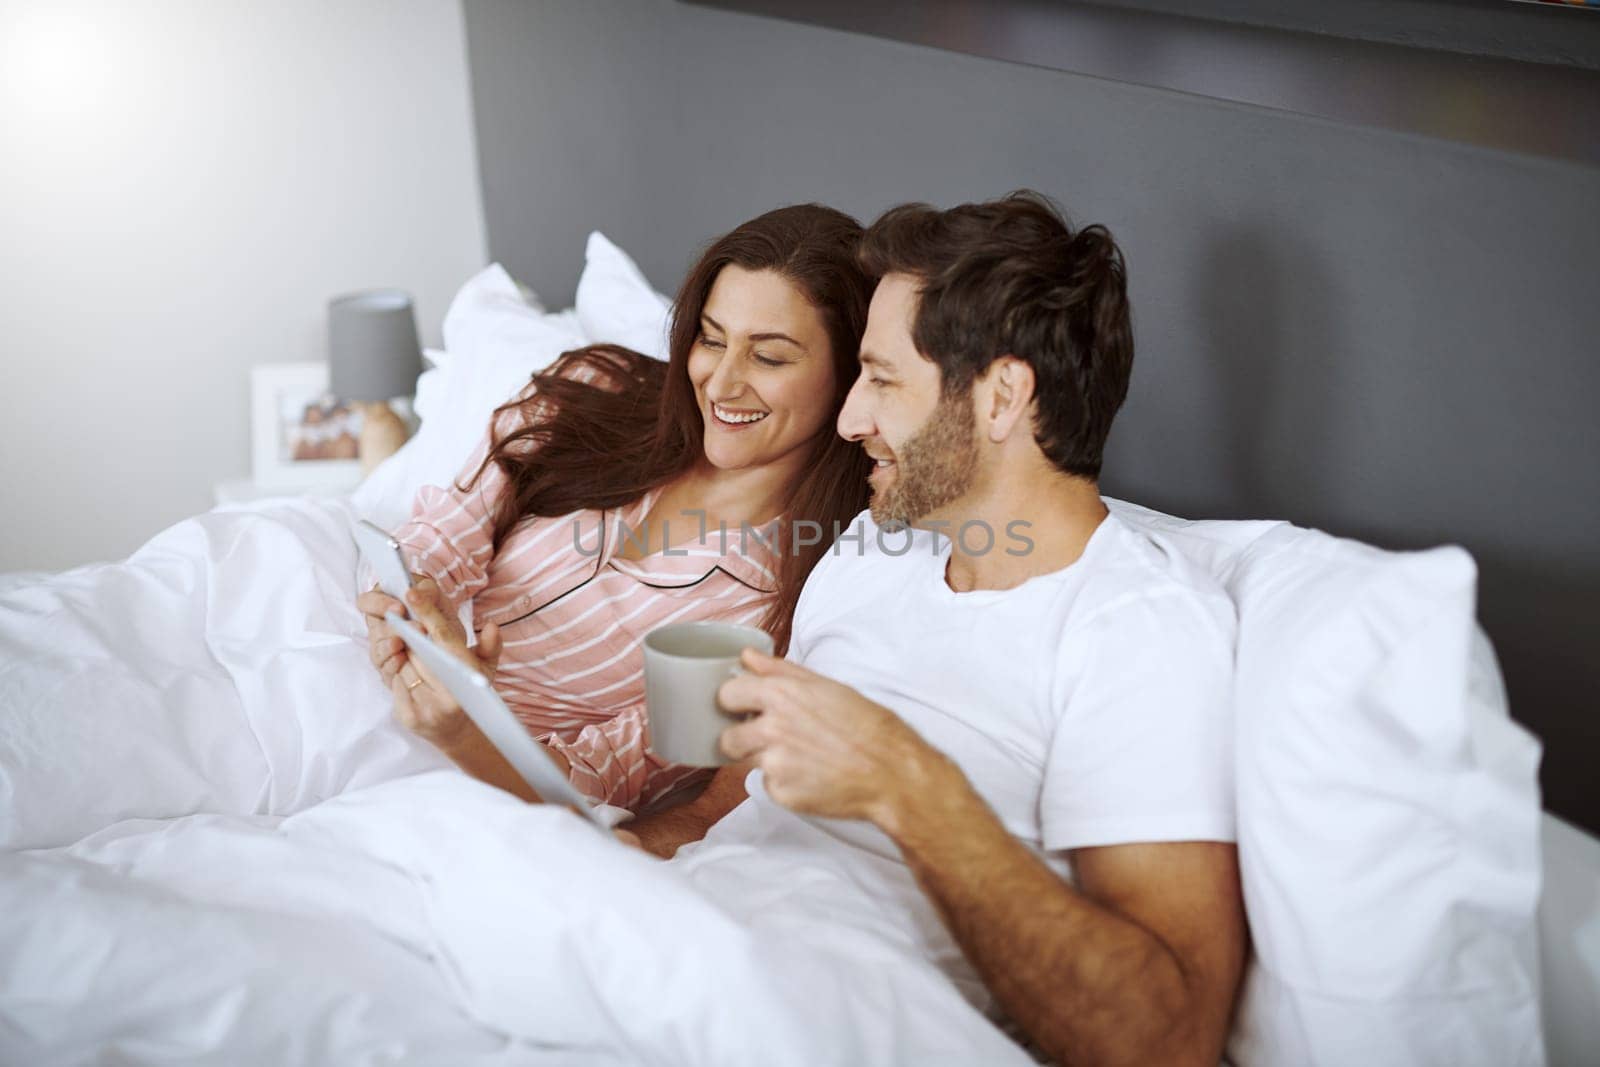 Look at this post. a couple using their wireless devices while lying in bed